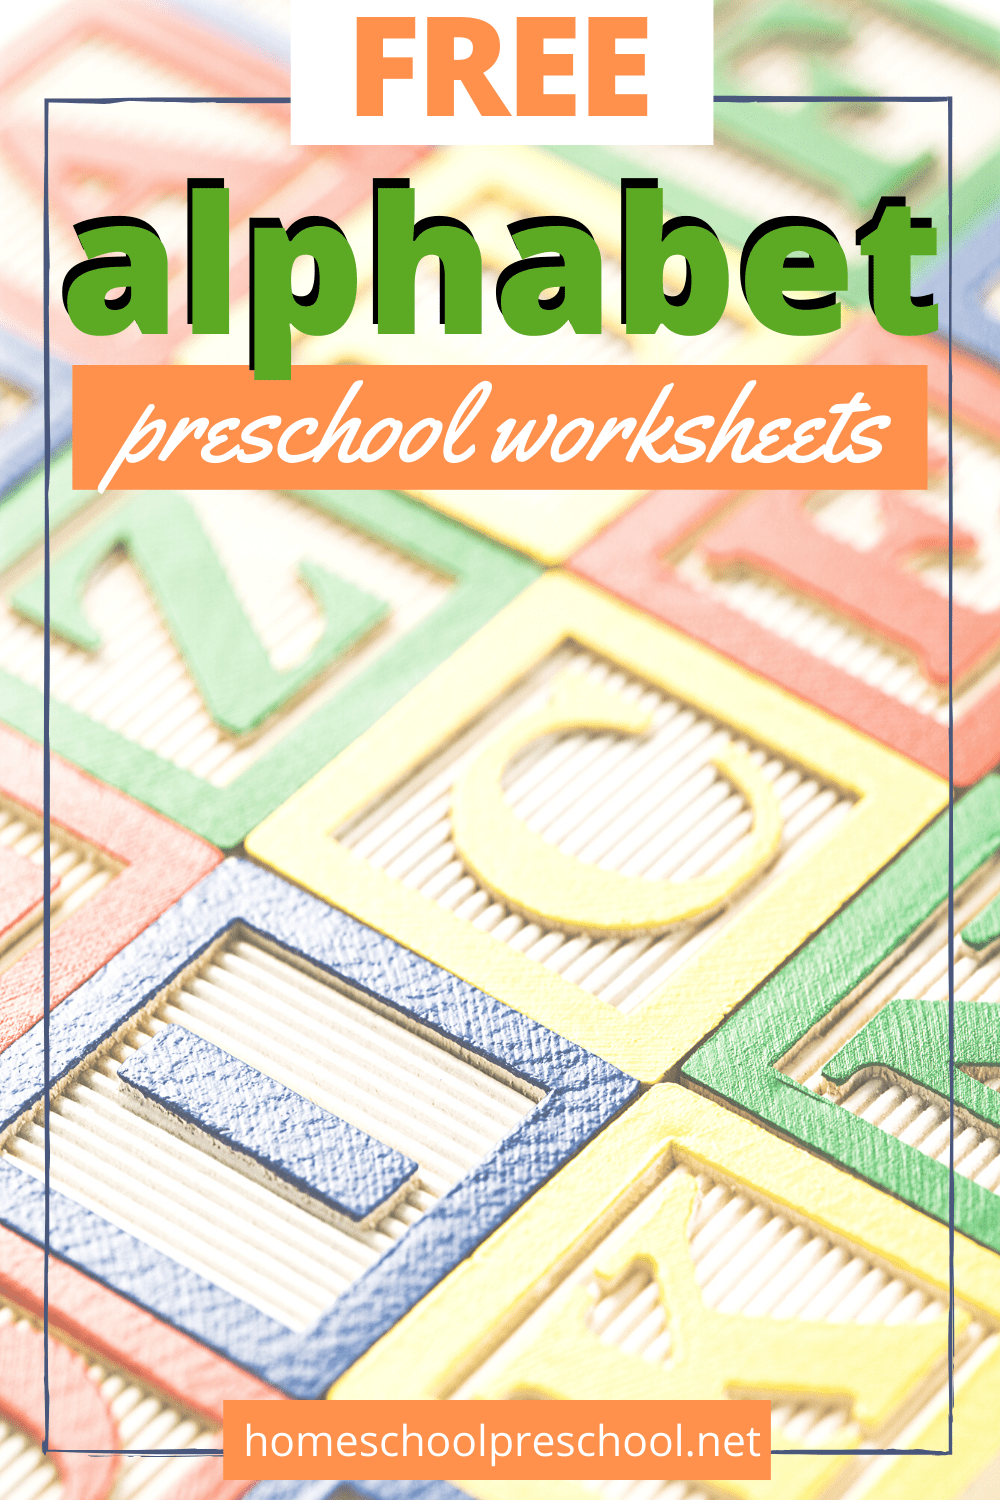 These free printable alphabet worksheets are the perfect way to engage young learners with handwriting practice, beginning sounds, letter recognition, and more!